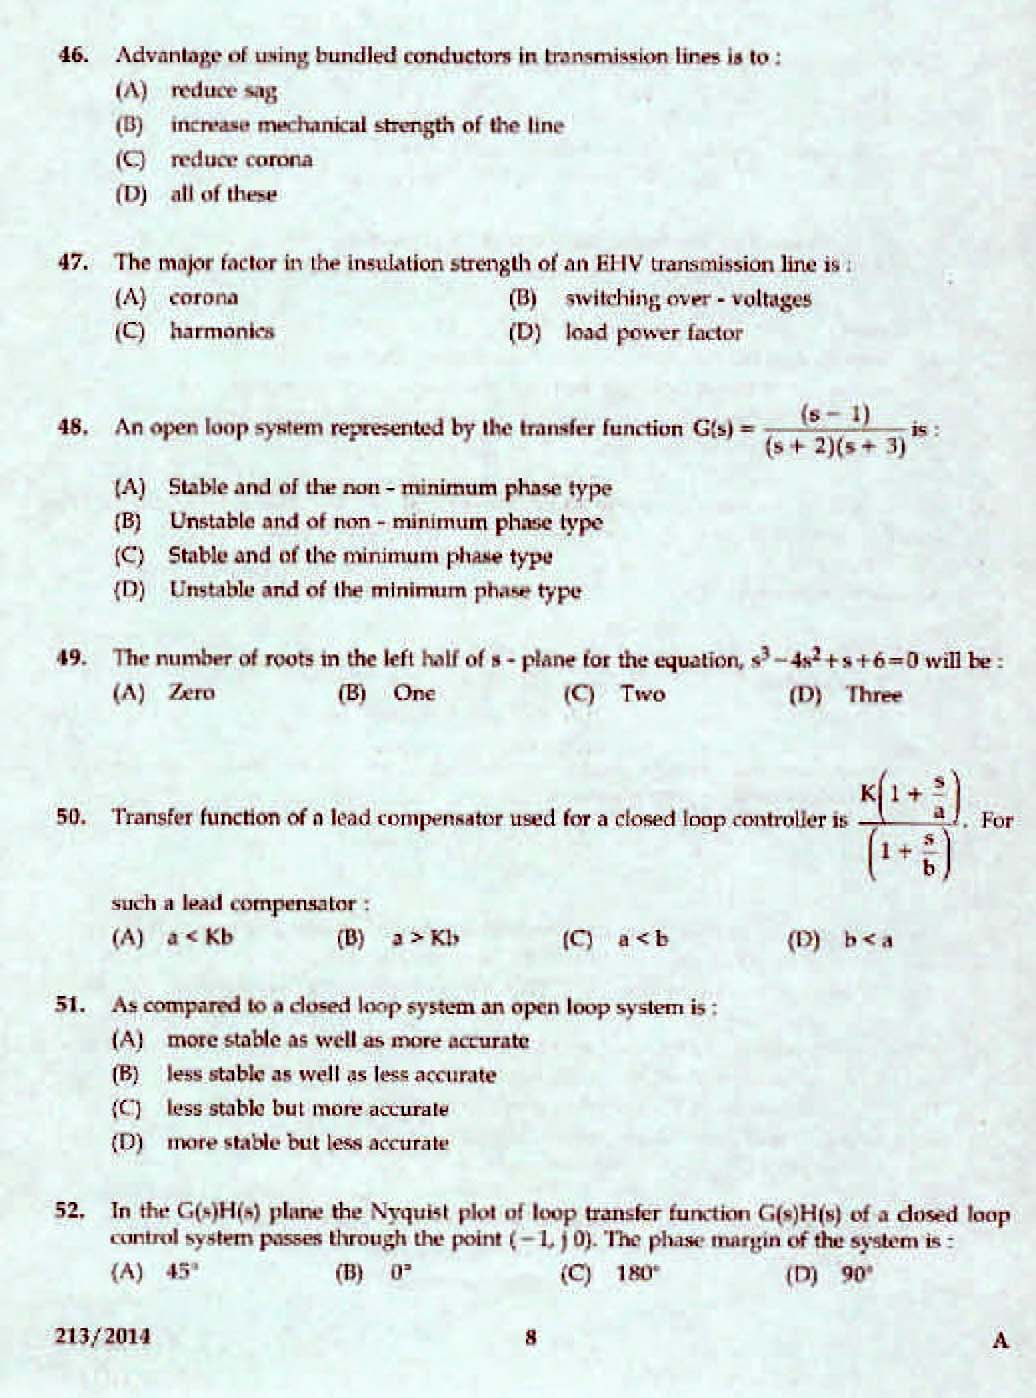 Kerala PSC Assistant Engineer Electrical Exam 2014 Question Paper Code 2132014 6